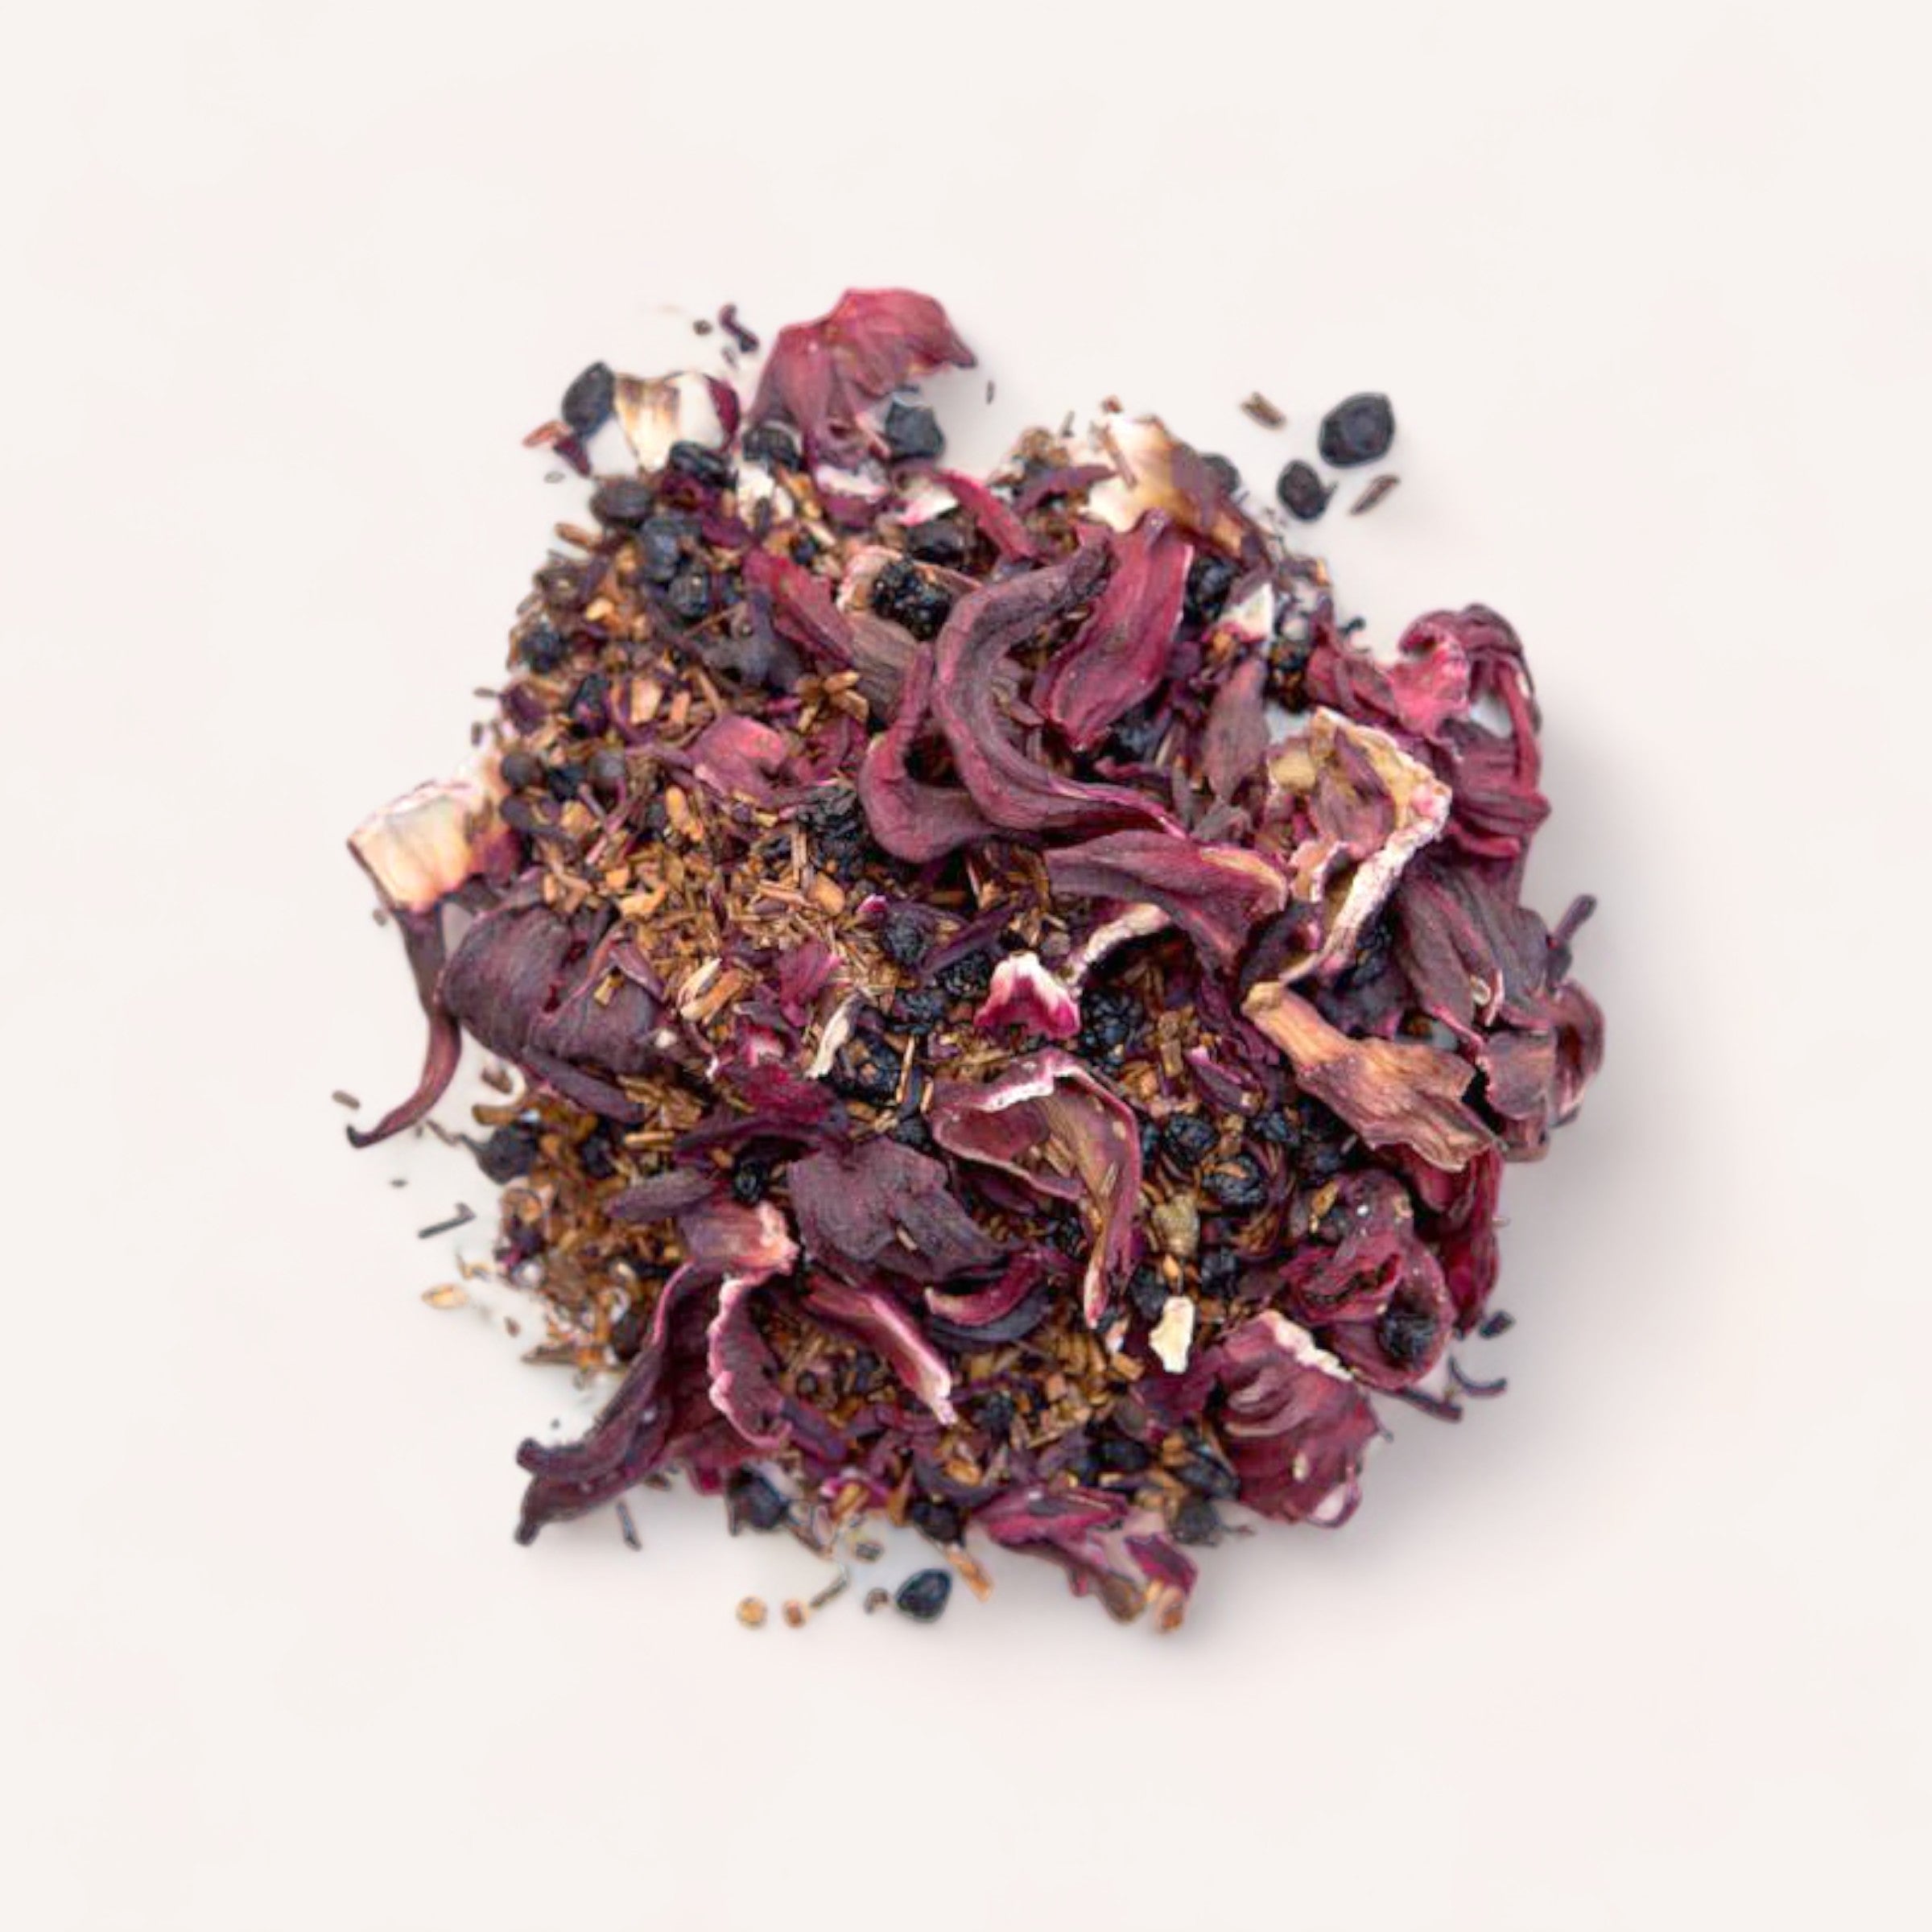 A pile of loose-leaf Bloom Tea by Forage + Bloom with dried rose petals, various herbs, and antioxidant-rich hibiscus tea on a light background.